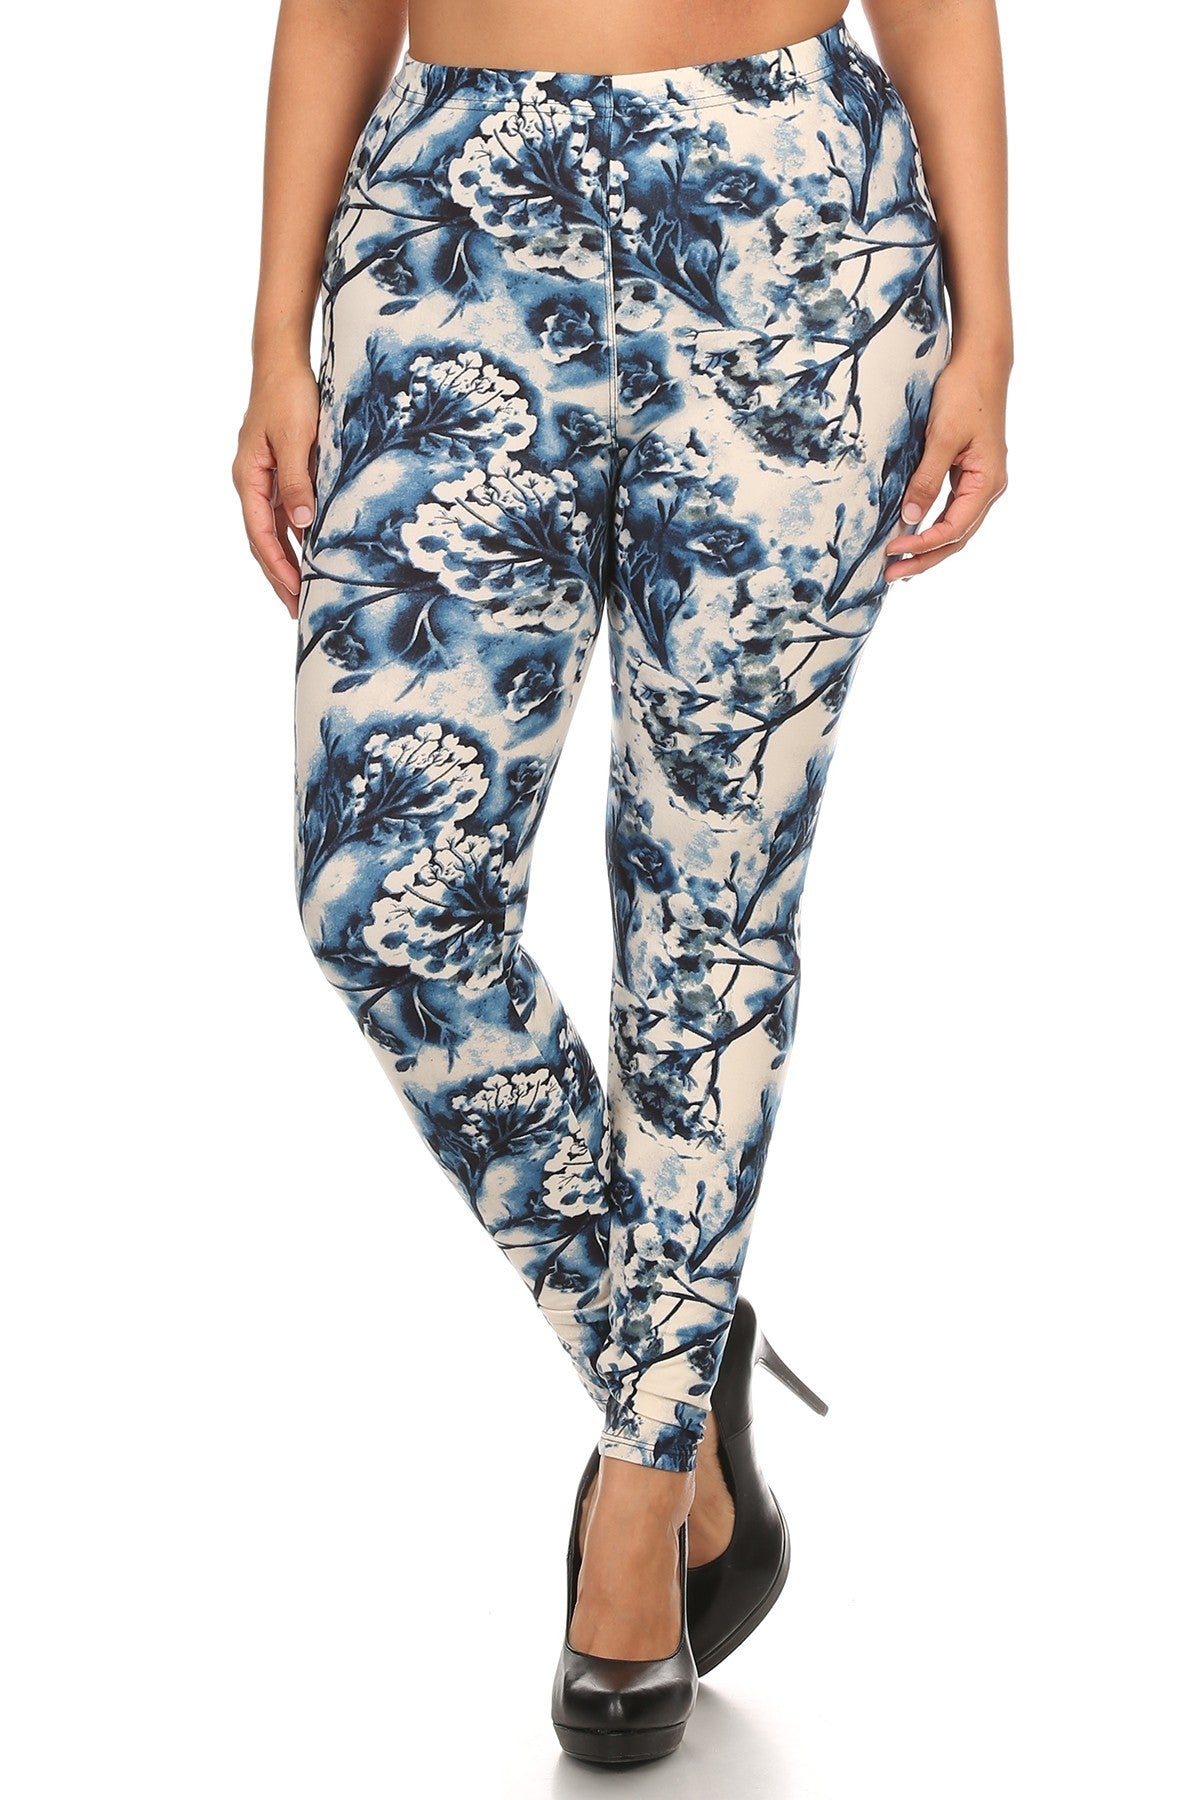 Plus Size Floral Print, Full Length Leggings In A Slim Fitting Style With A Banded High Waist - Tigbuls Variety Fashion